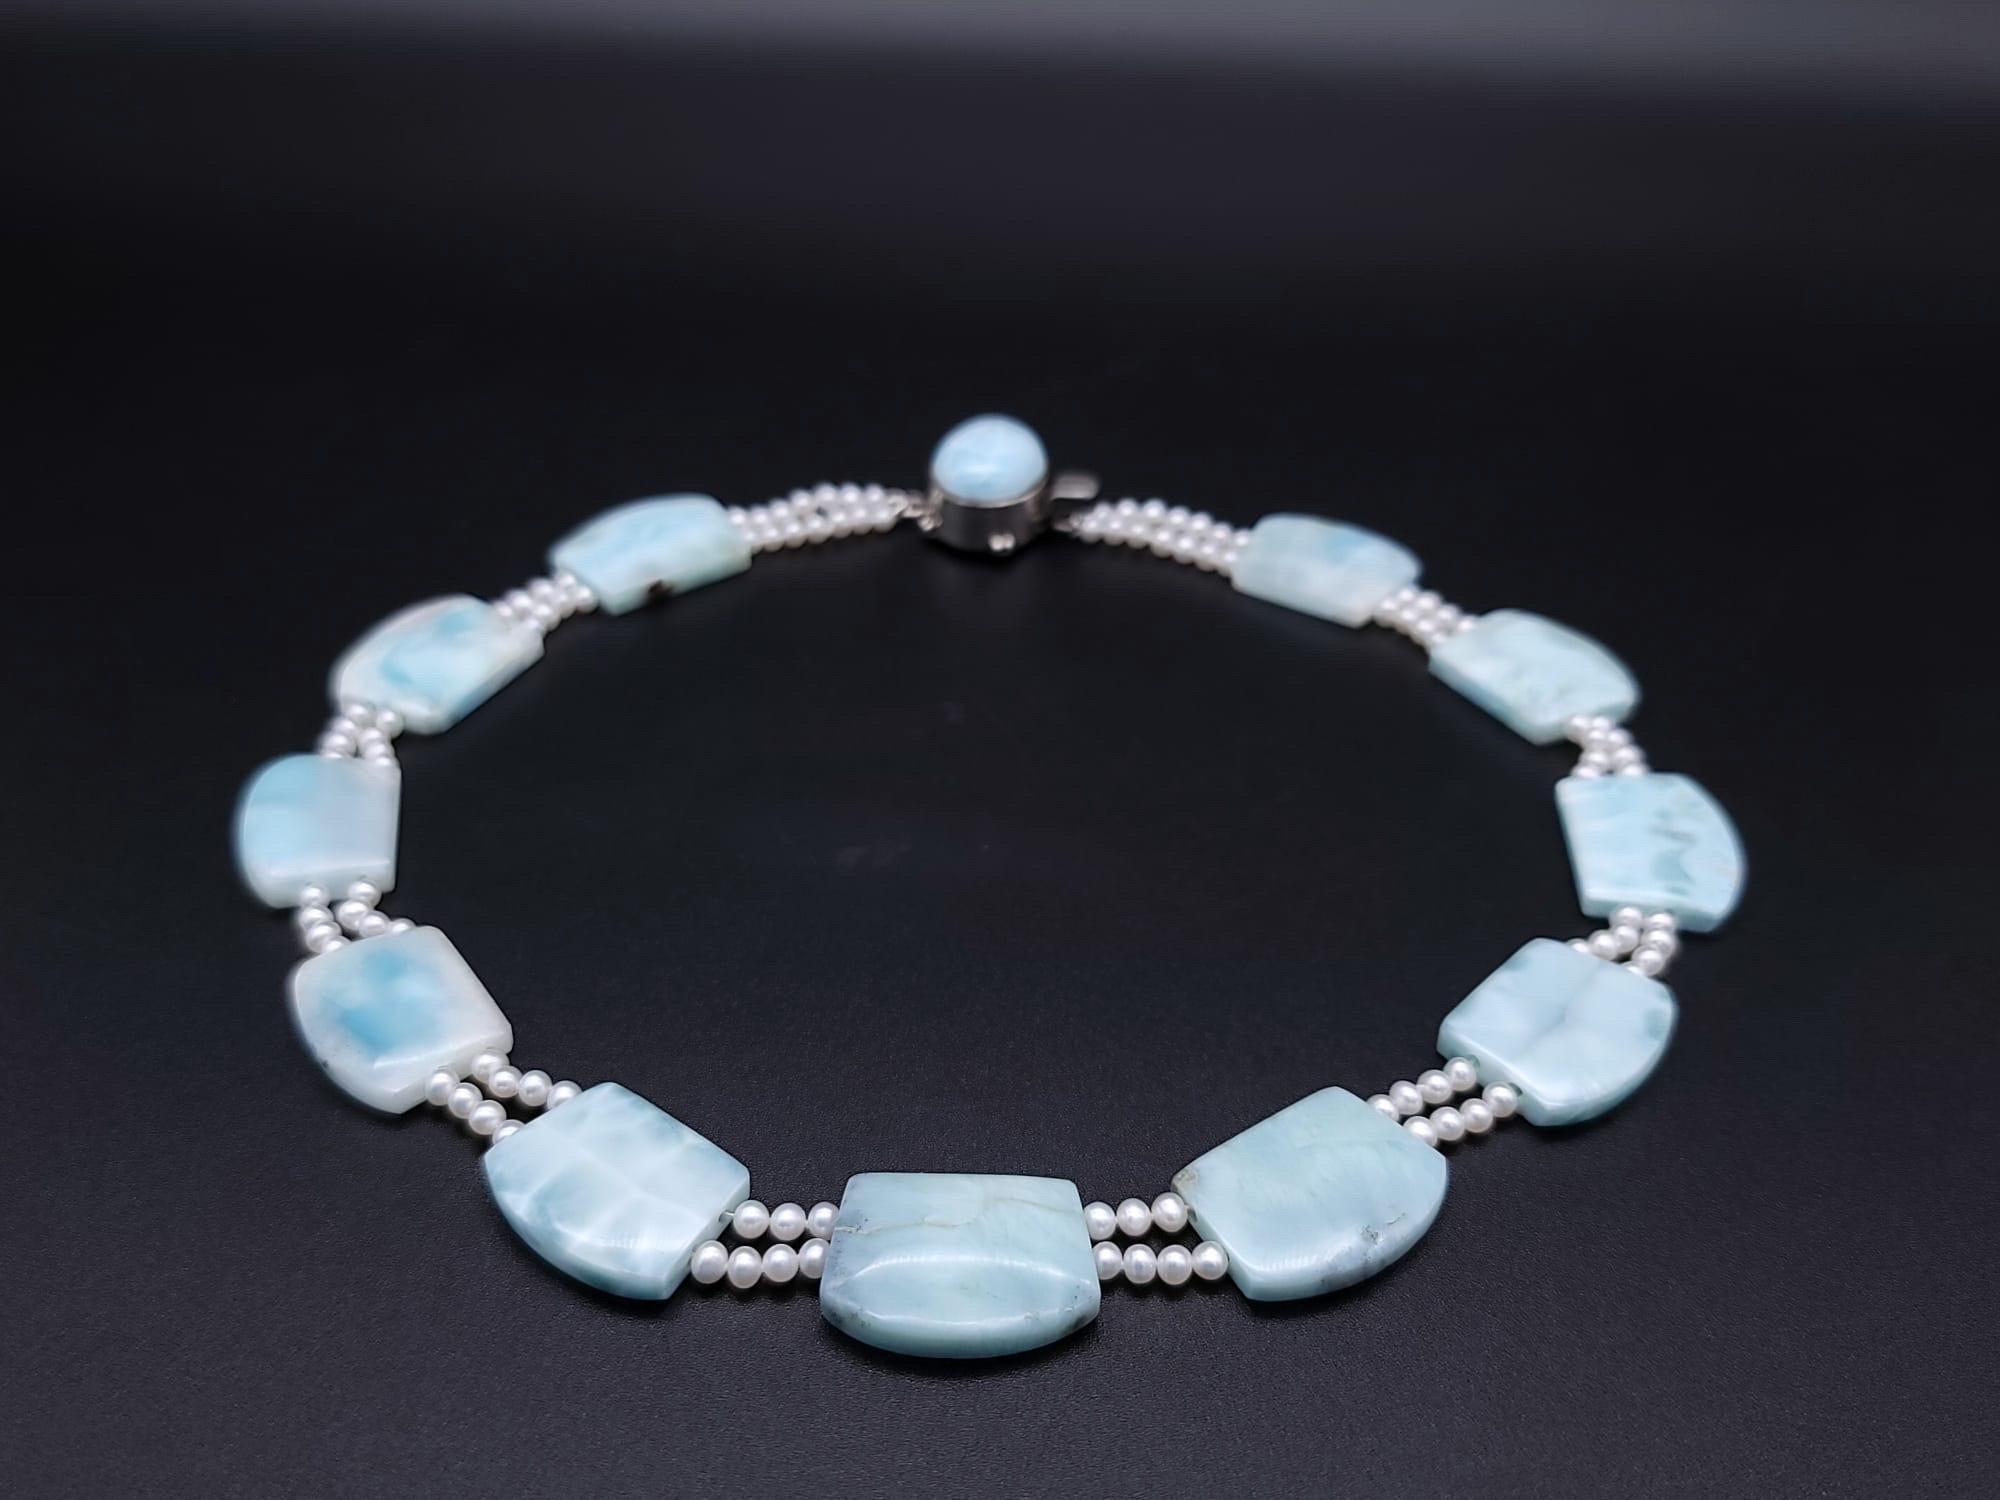 One-of-a-Kind

Gentle as a Caribbean breeze this softly colored Larimar and Pearl necklace is about as romantic as a necklace can be. Larimar, found only in the Dominican Republic, often referred to as “the blue Jewel of the Caribbean